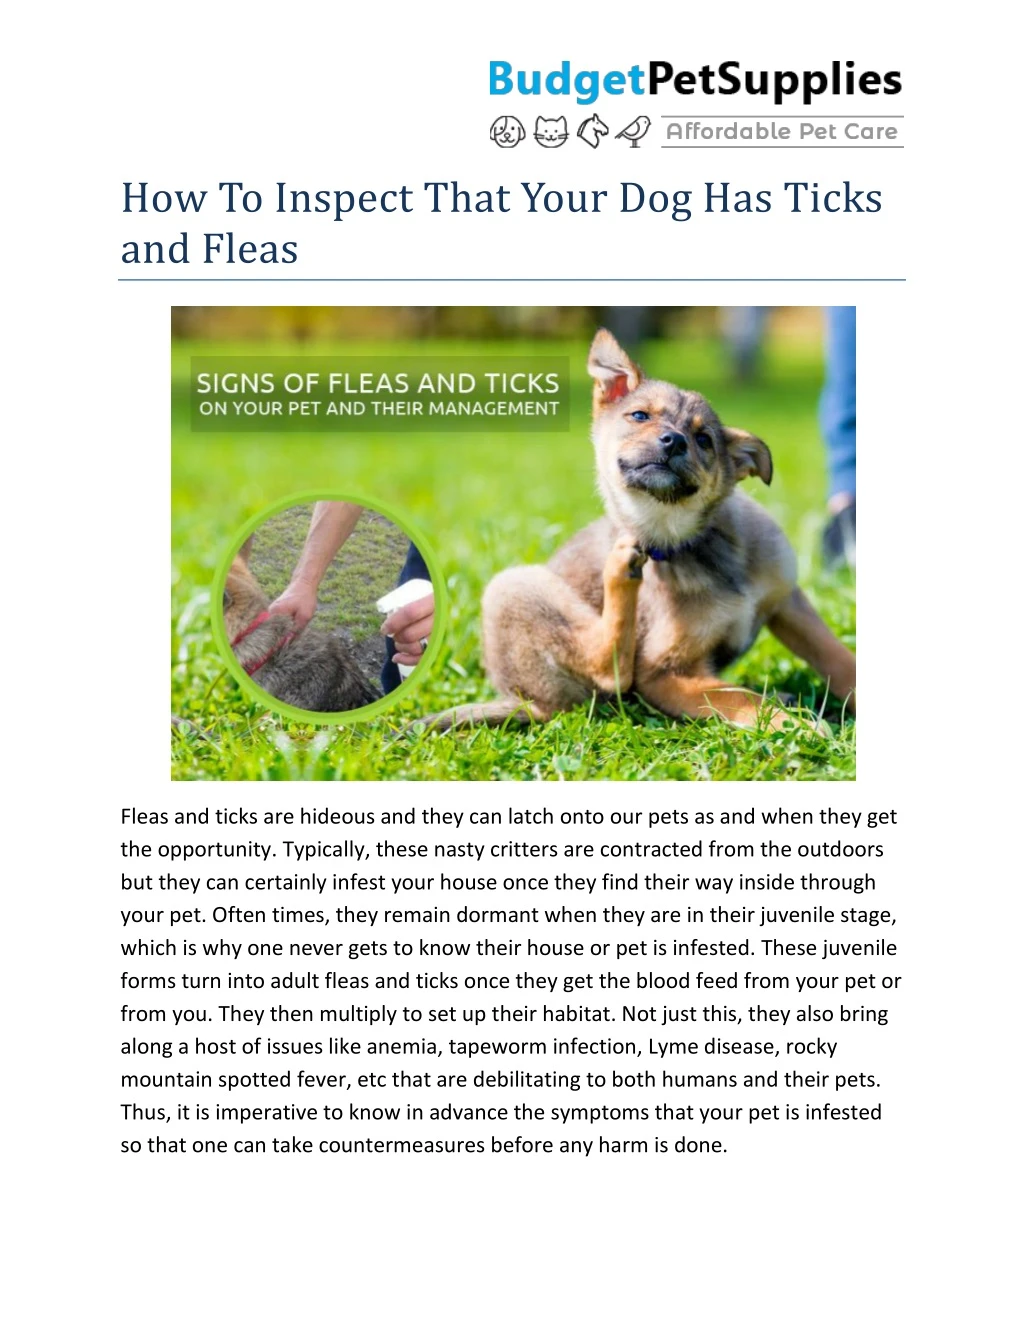 how to inspect that your dog has ticks and fleas